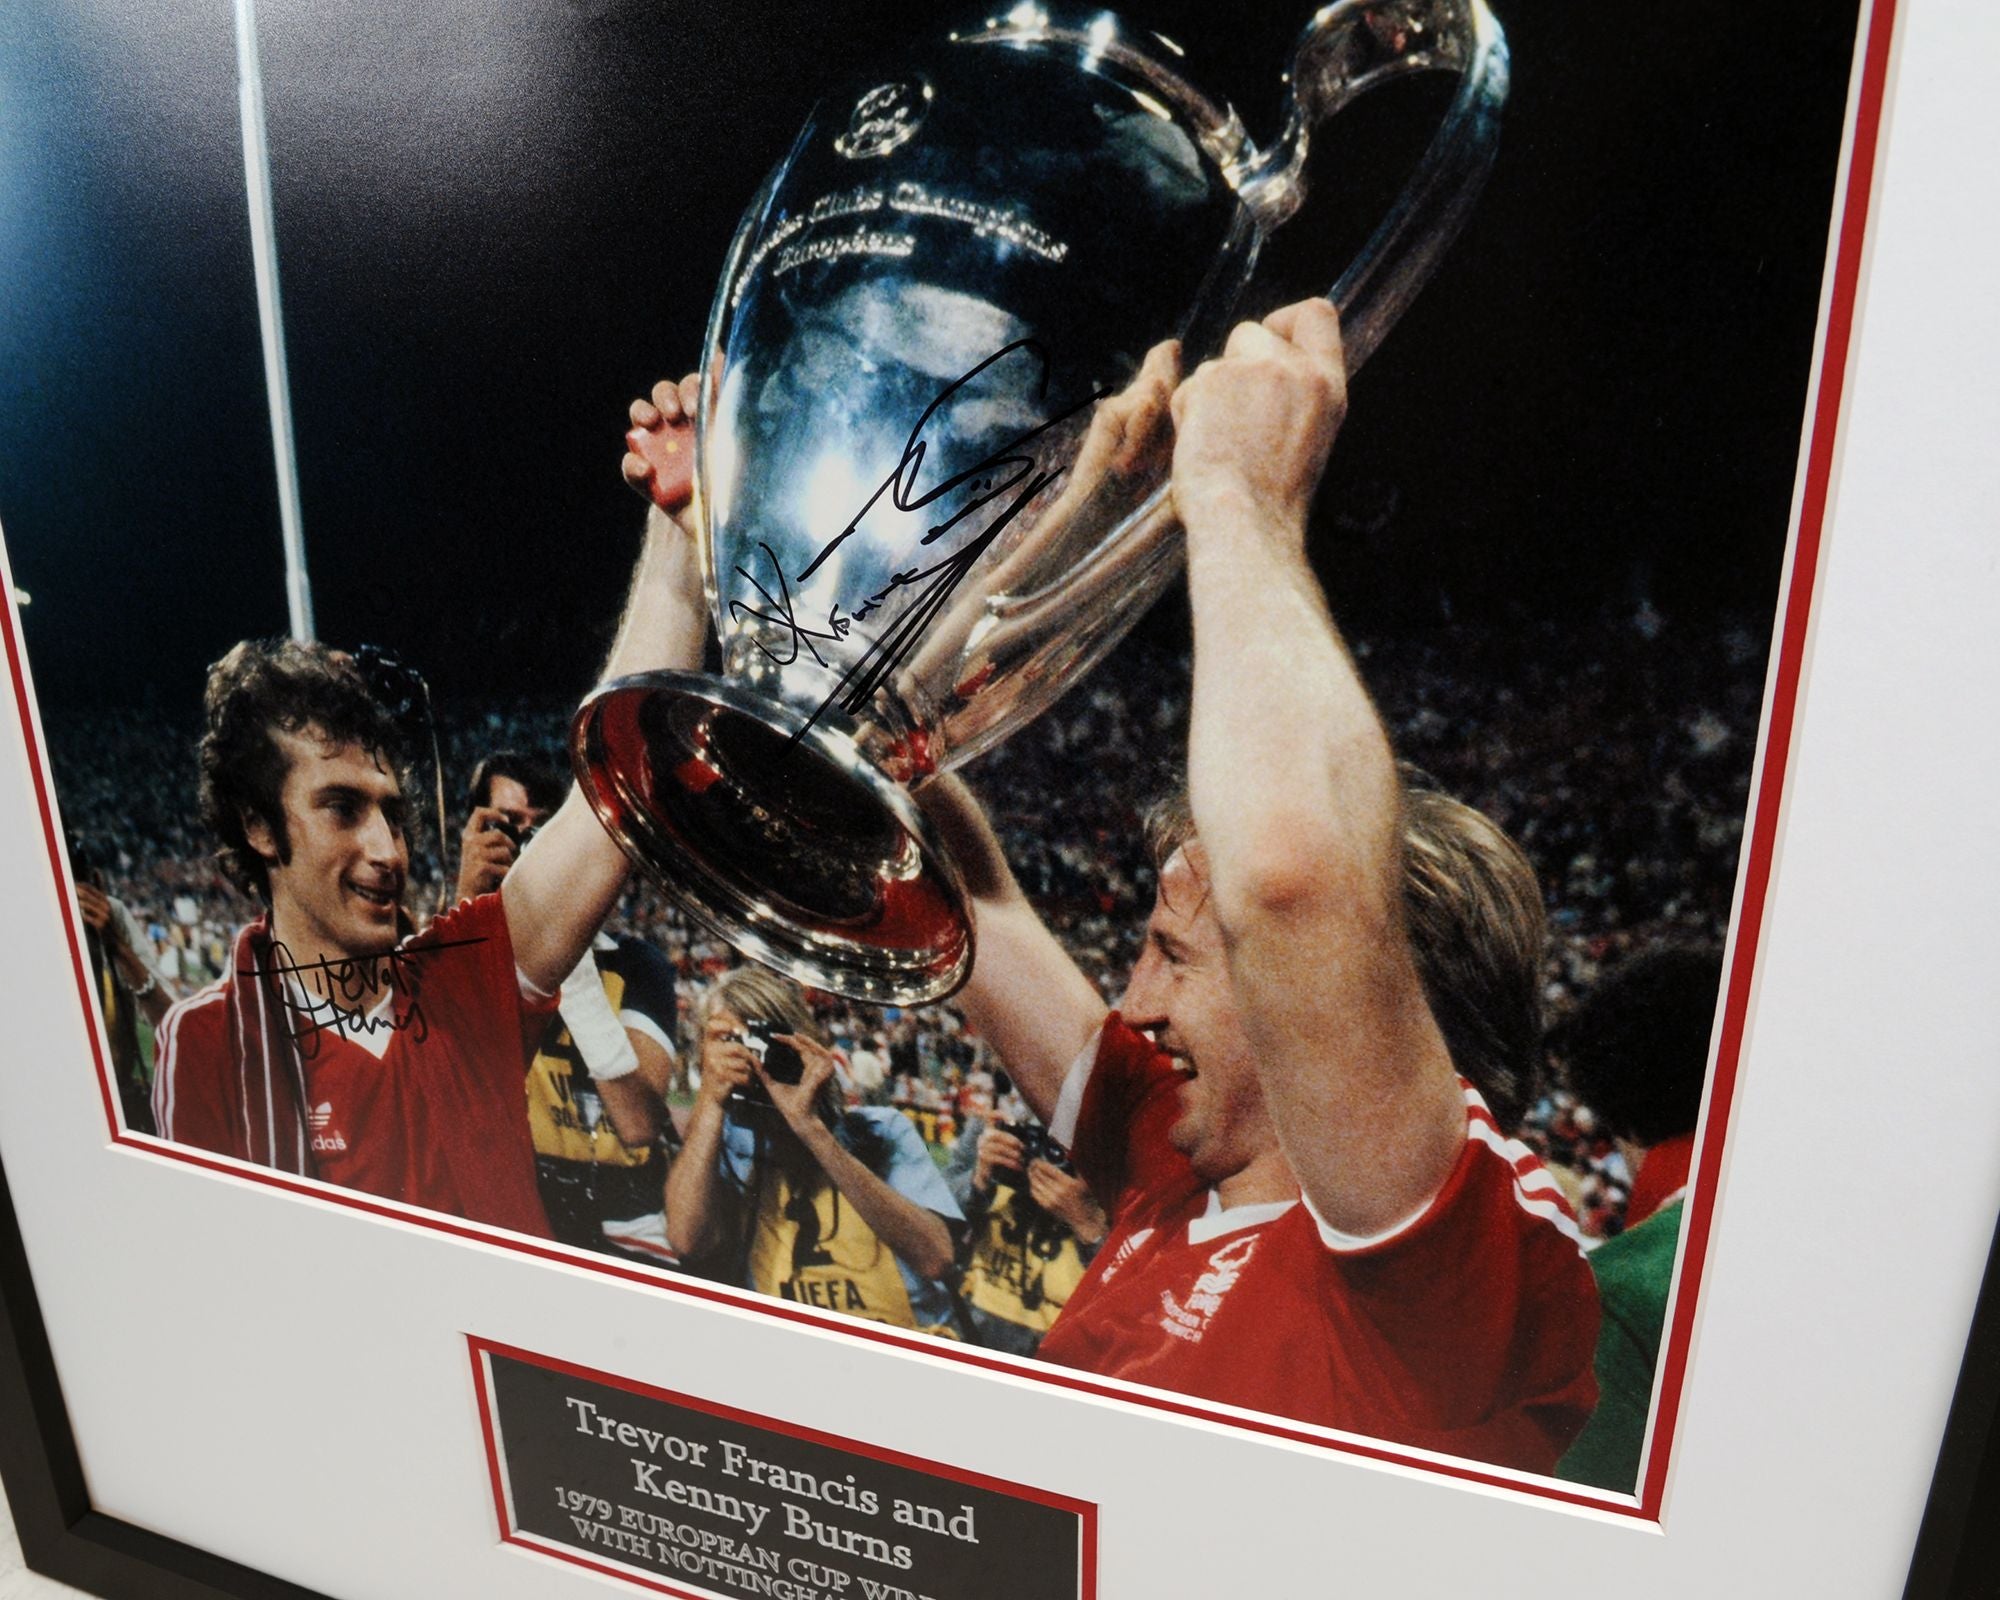 * NEW * Nottingham Forest 1979 European Cup Winners Frame, Signed by Trevor Francis and Kenny Burns